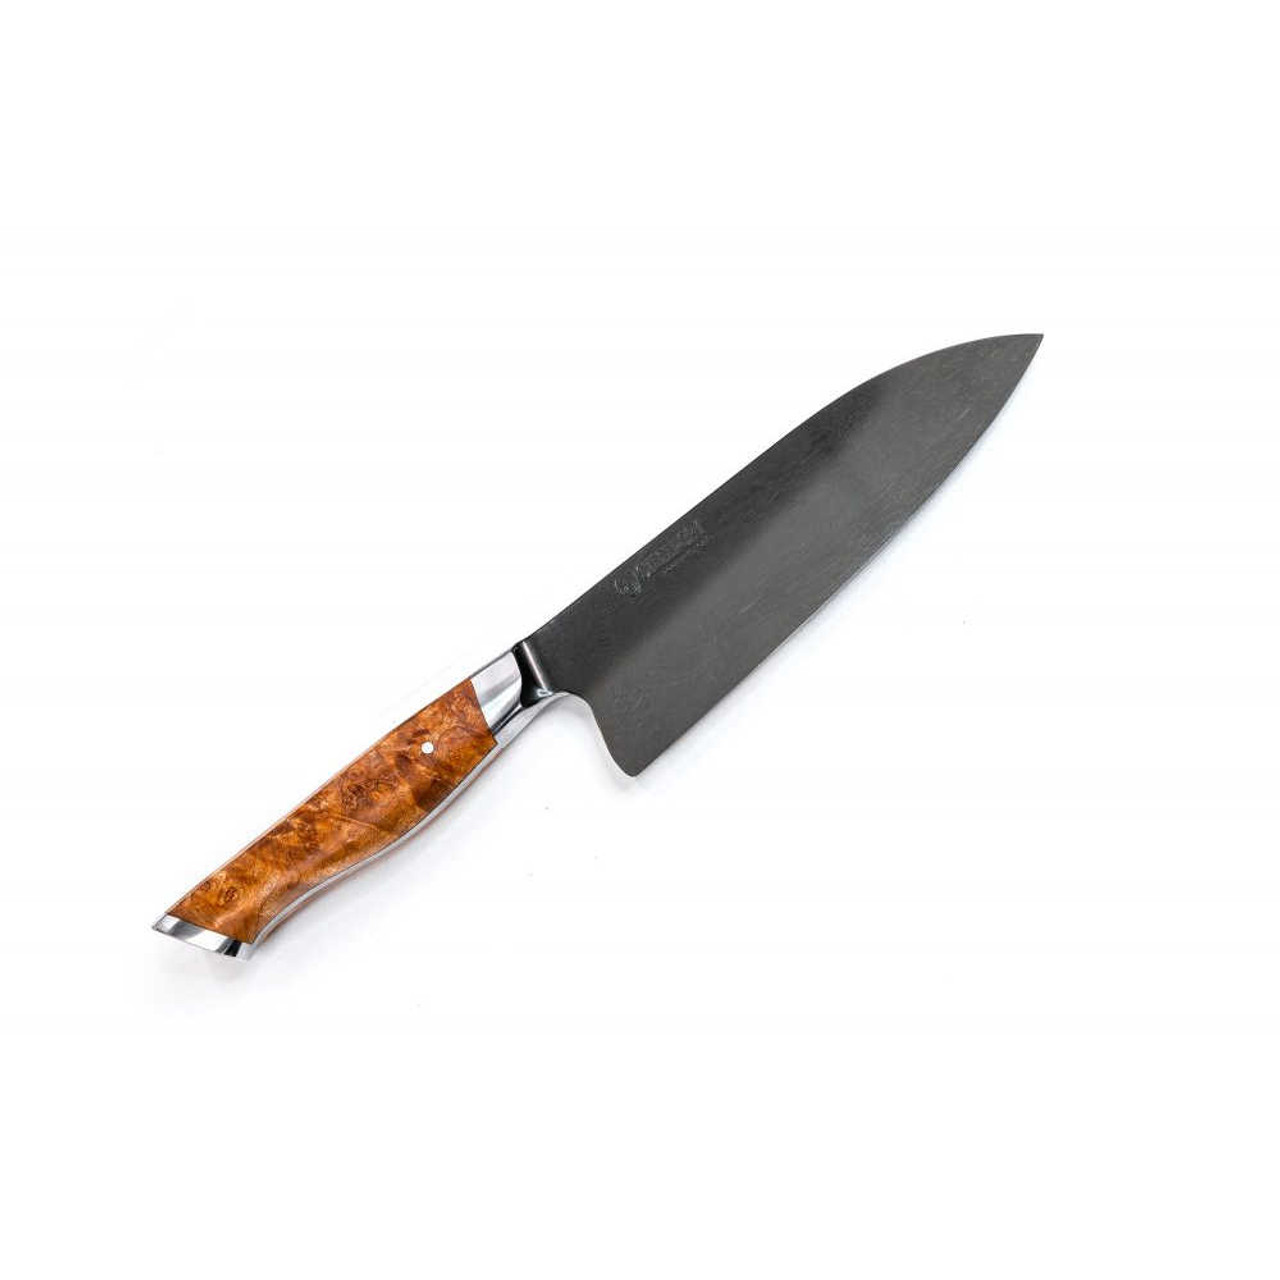 https://cdn11.bigcommerce.com/s-hccytny0od/images/stencil/1280x1280/products/4795/19608/STEELPORT_Chefs_Knife_6-Inch_3__38910.1655836593.jpg?c=2?imbypass=on